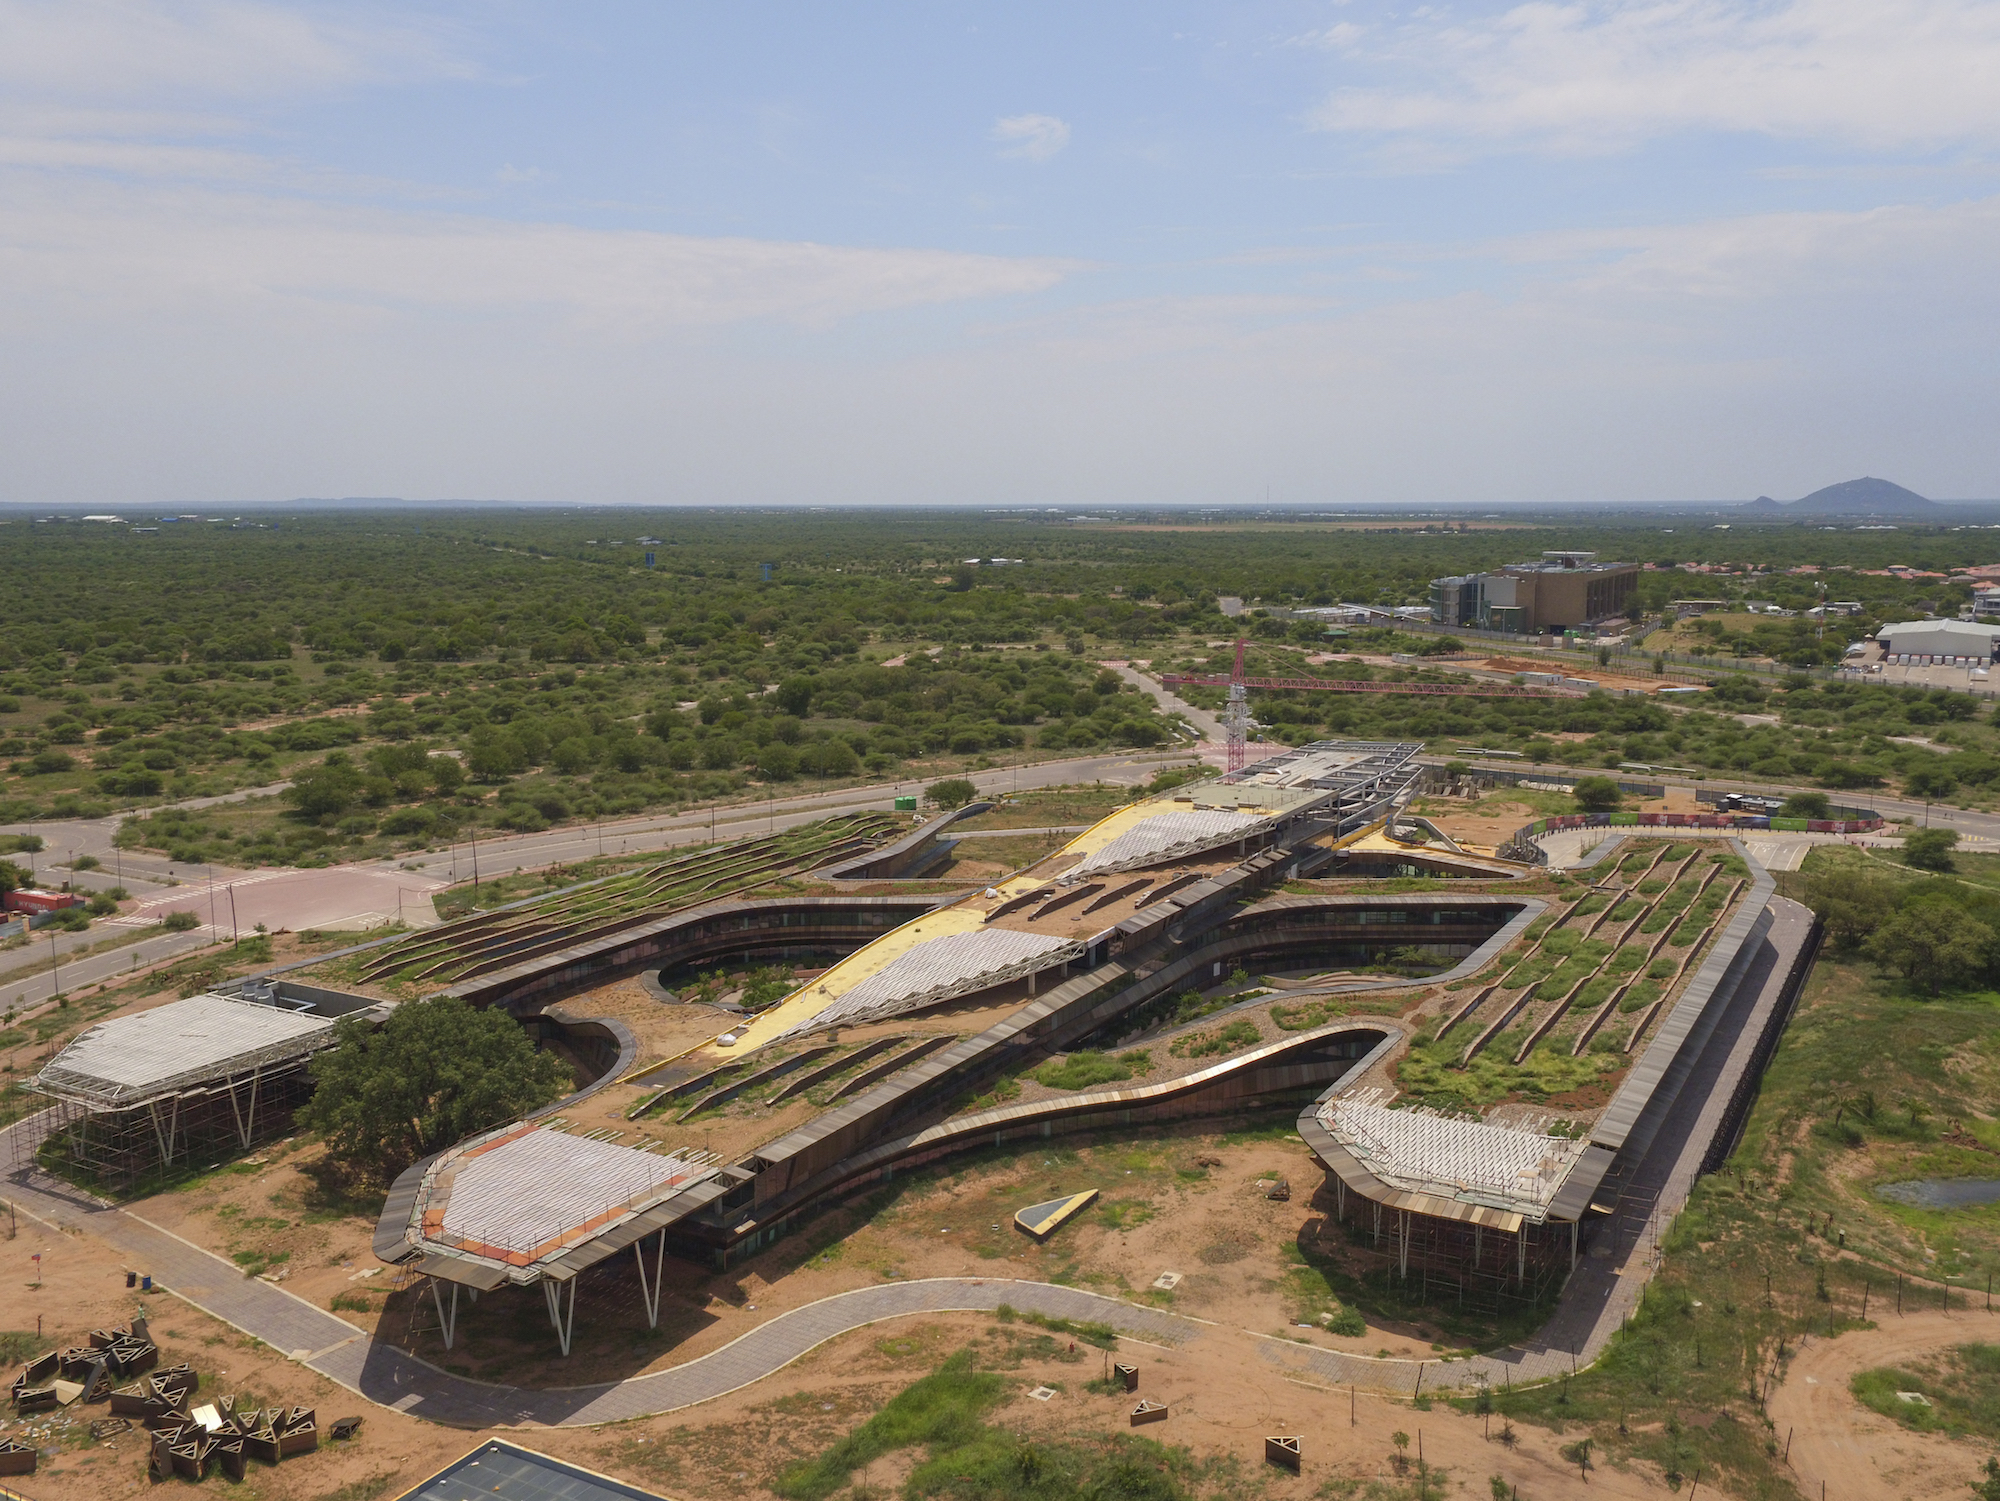 Aerial image of the Botswana Innovation Hub and its spaceship-like form